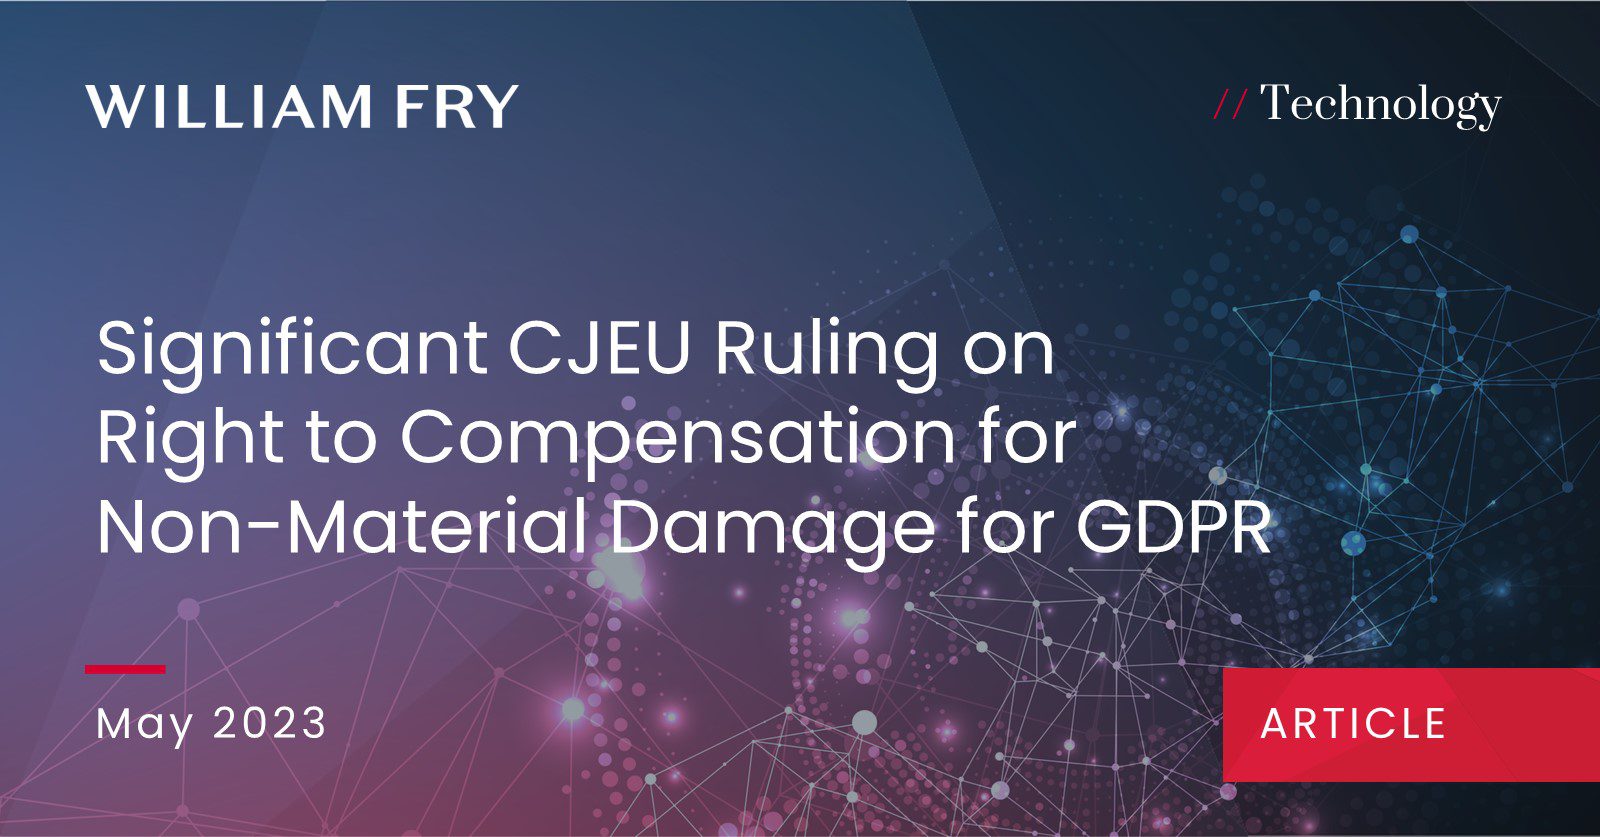 Significant CJEU Ruling on Right to Compensation for Non-Material Damage for GDPR